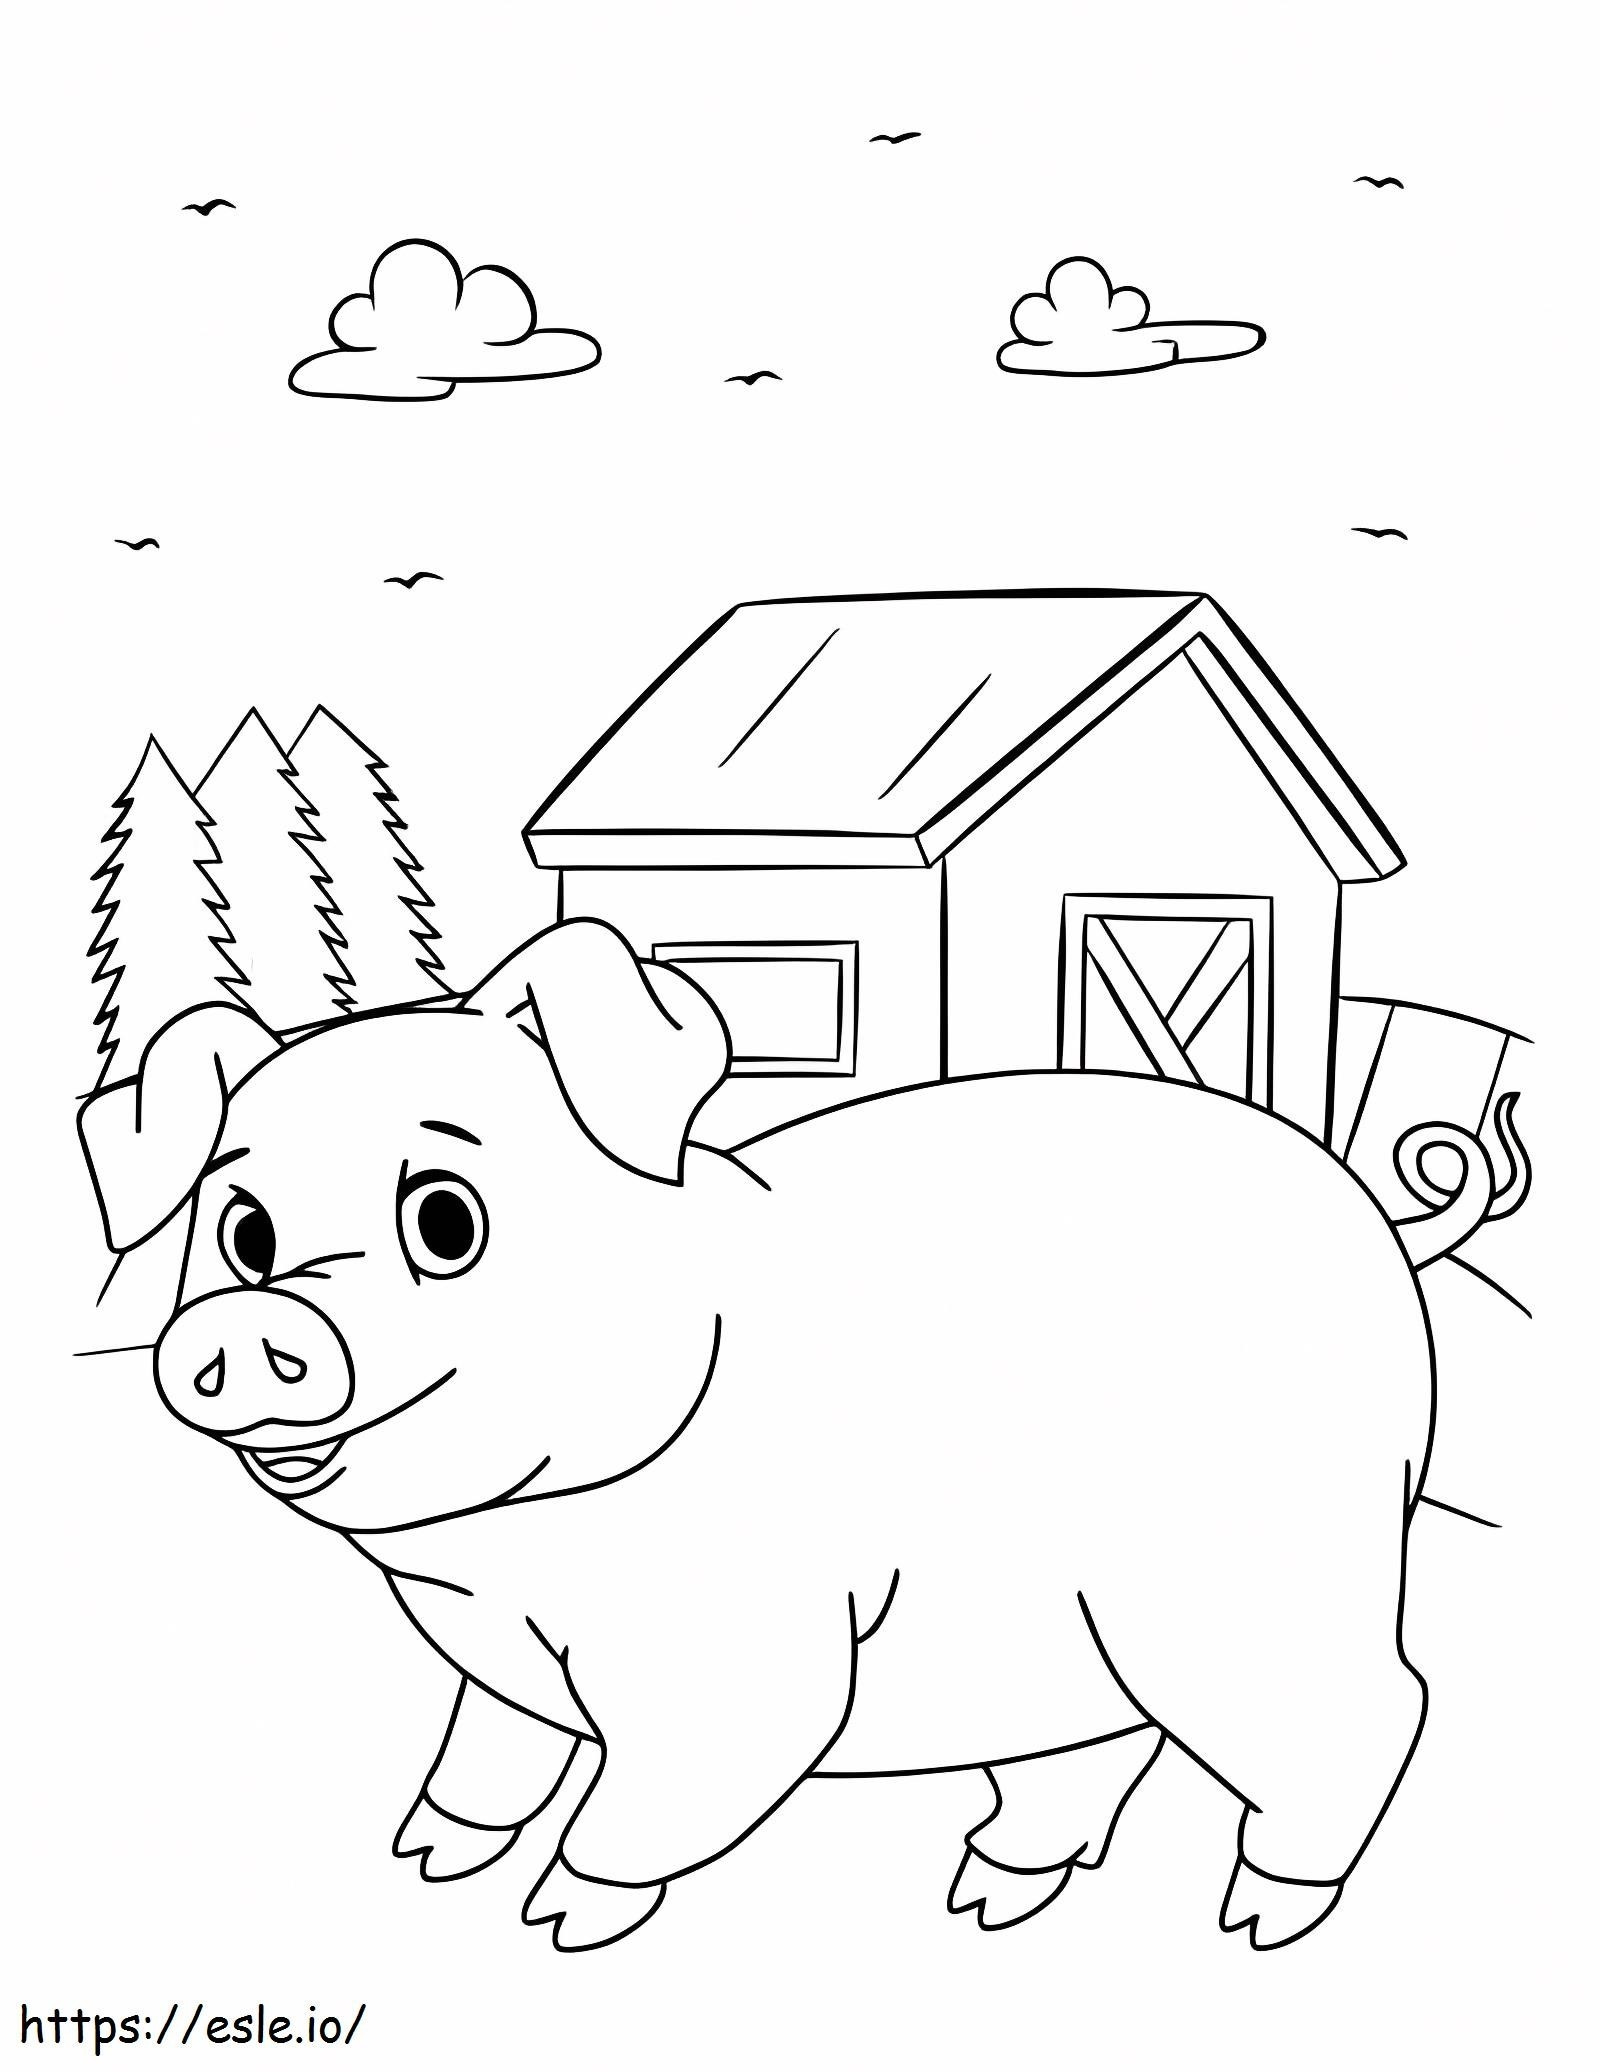 Pig In Barn coloring page